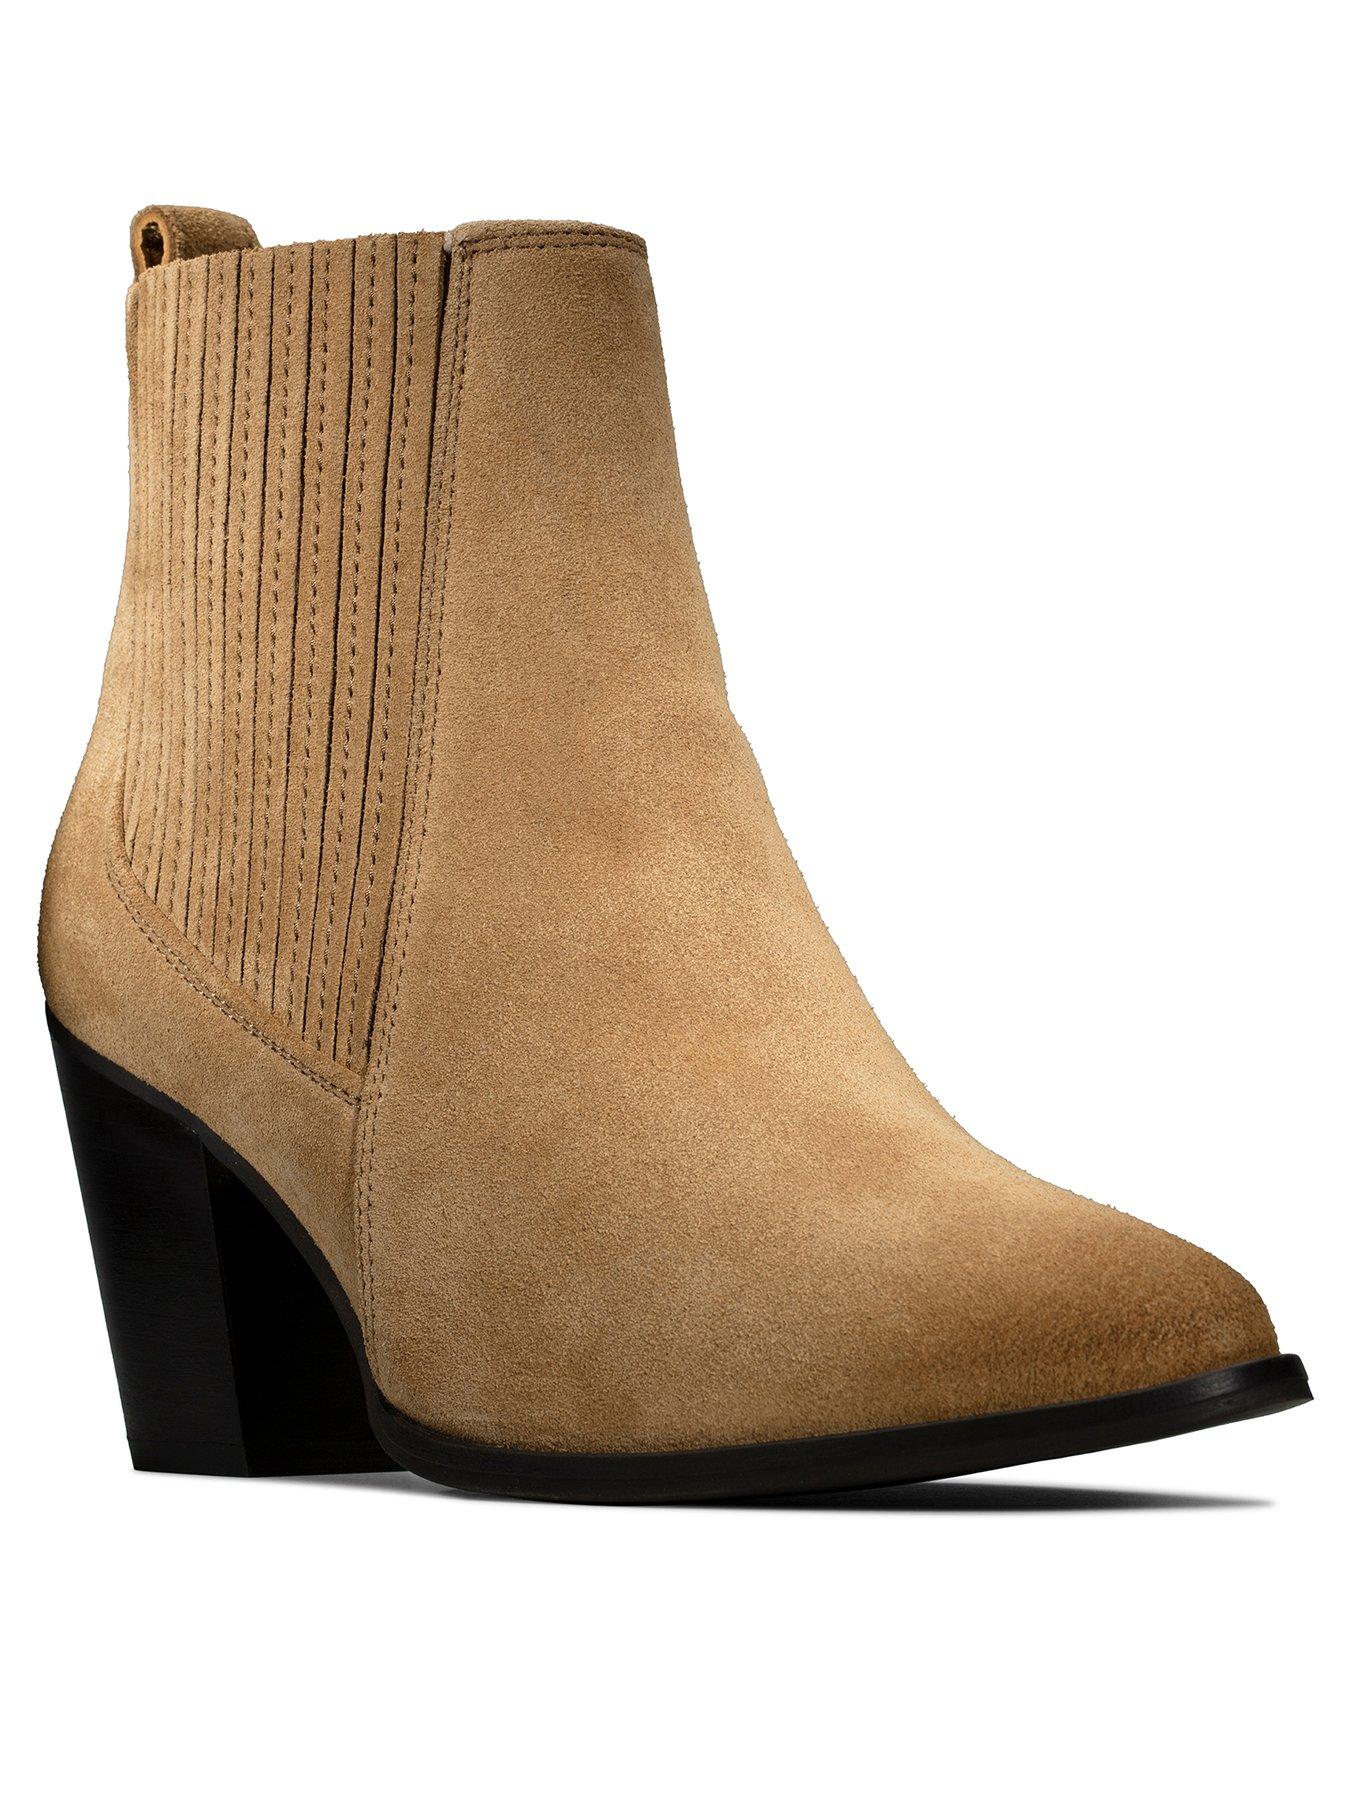 clarks tan wedge ankle boots